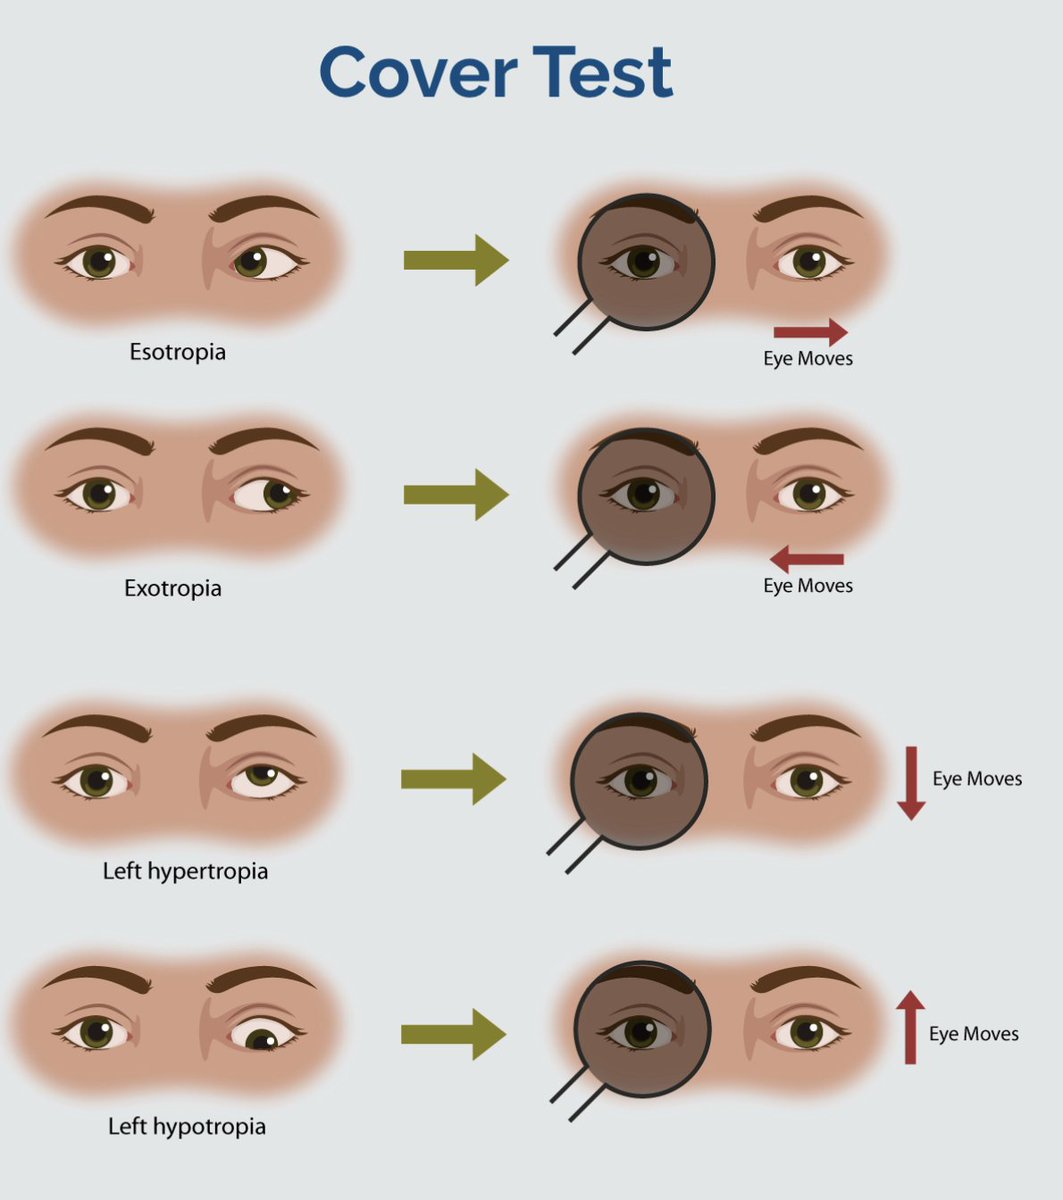 Exotropia = eye outward deviation relative to other when focusing on object; Cover test - 1 eye moves to re-establish fixation when other eye covered = true strabismus (tropia) rather than tendency (phoria, only apparent during cover test, not in NL binocular vision)